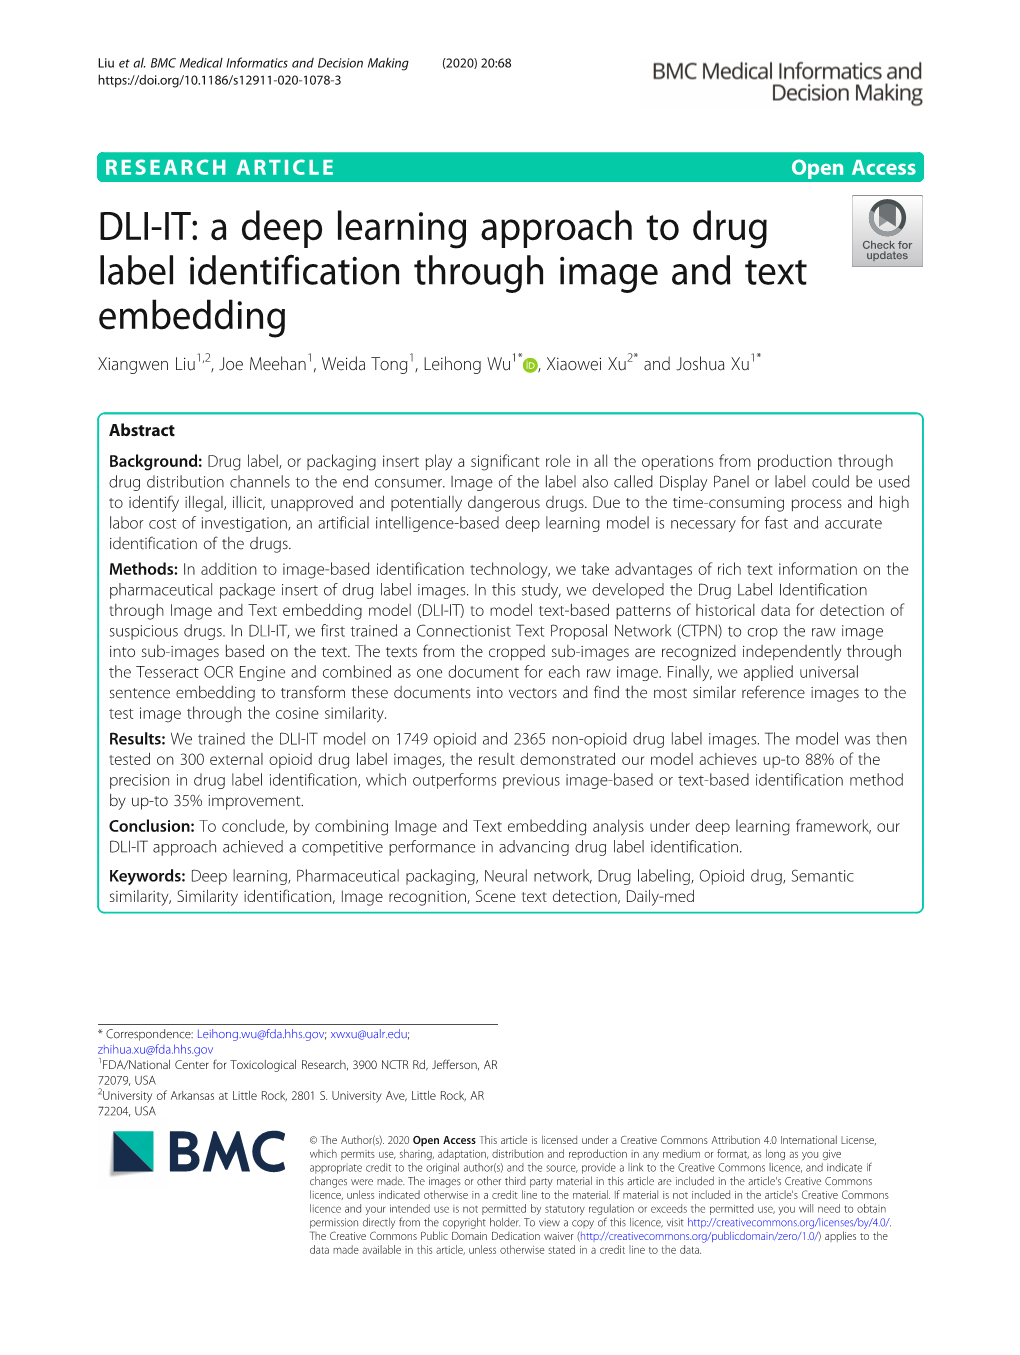 DLI-IT: a Deep Learning Approach to Drug Label Identification Through